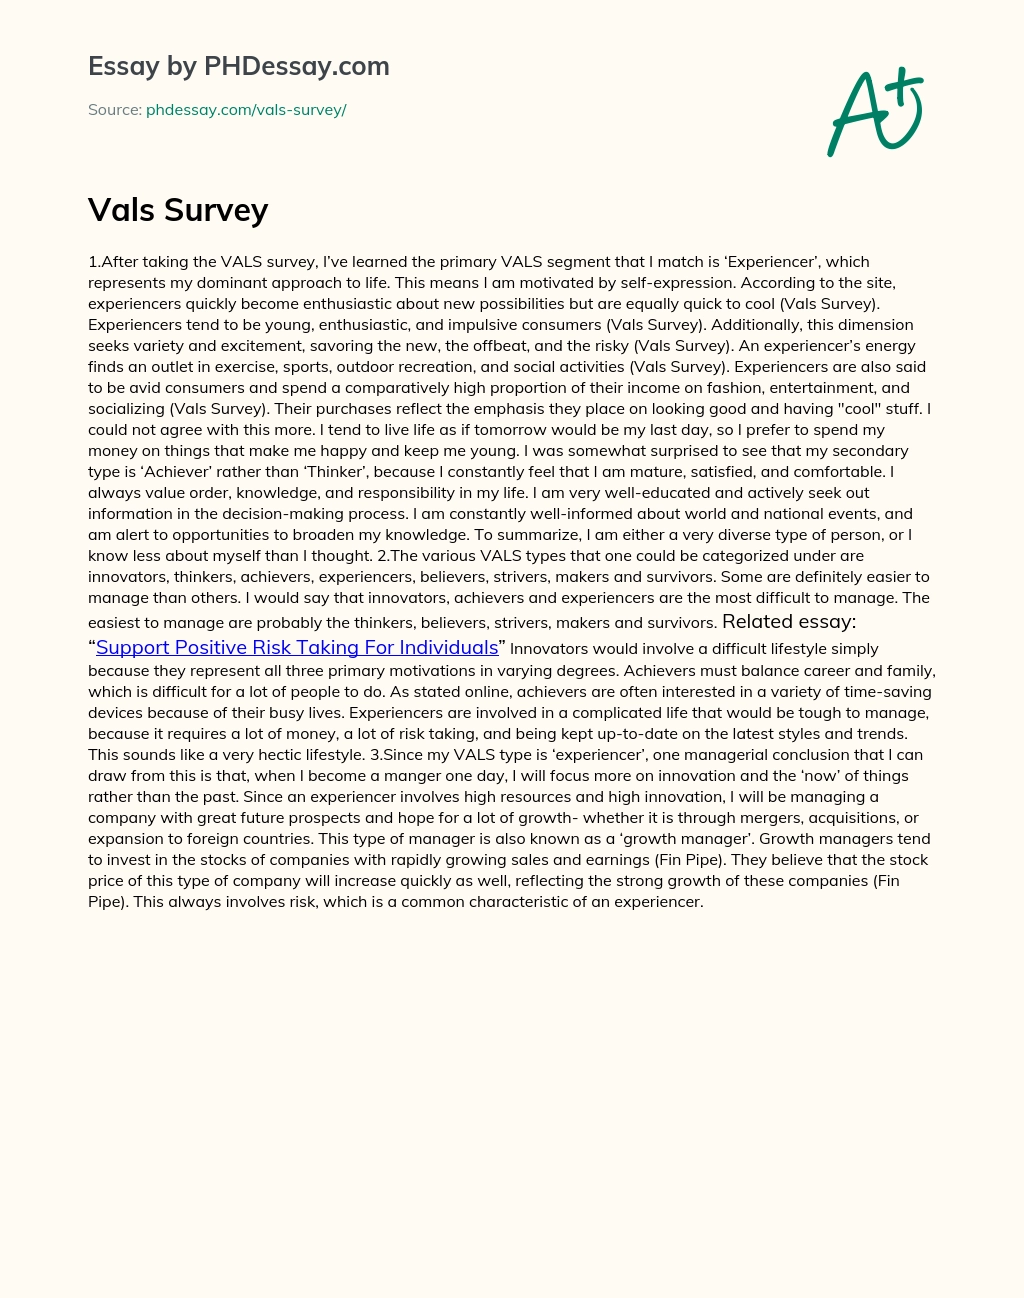 Experiencer VALS Segment: Young, Impulsive Consumers Who Seek Variety and Excitement essay